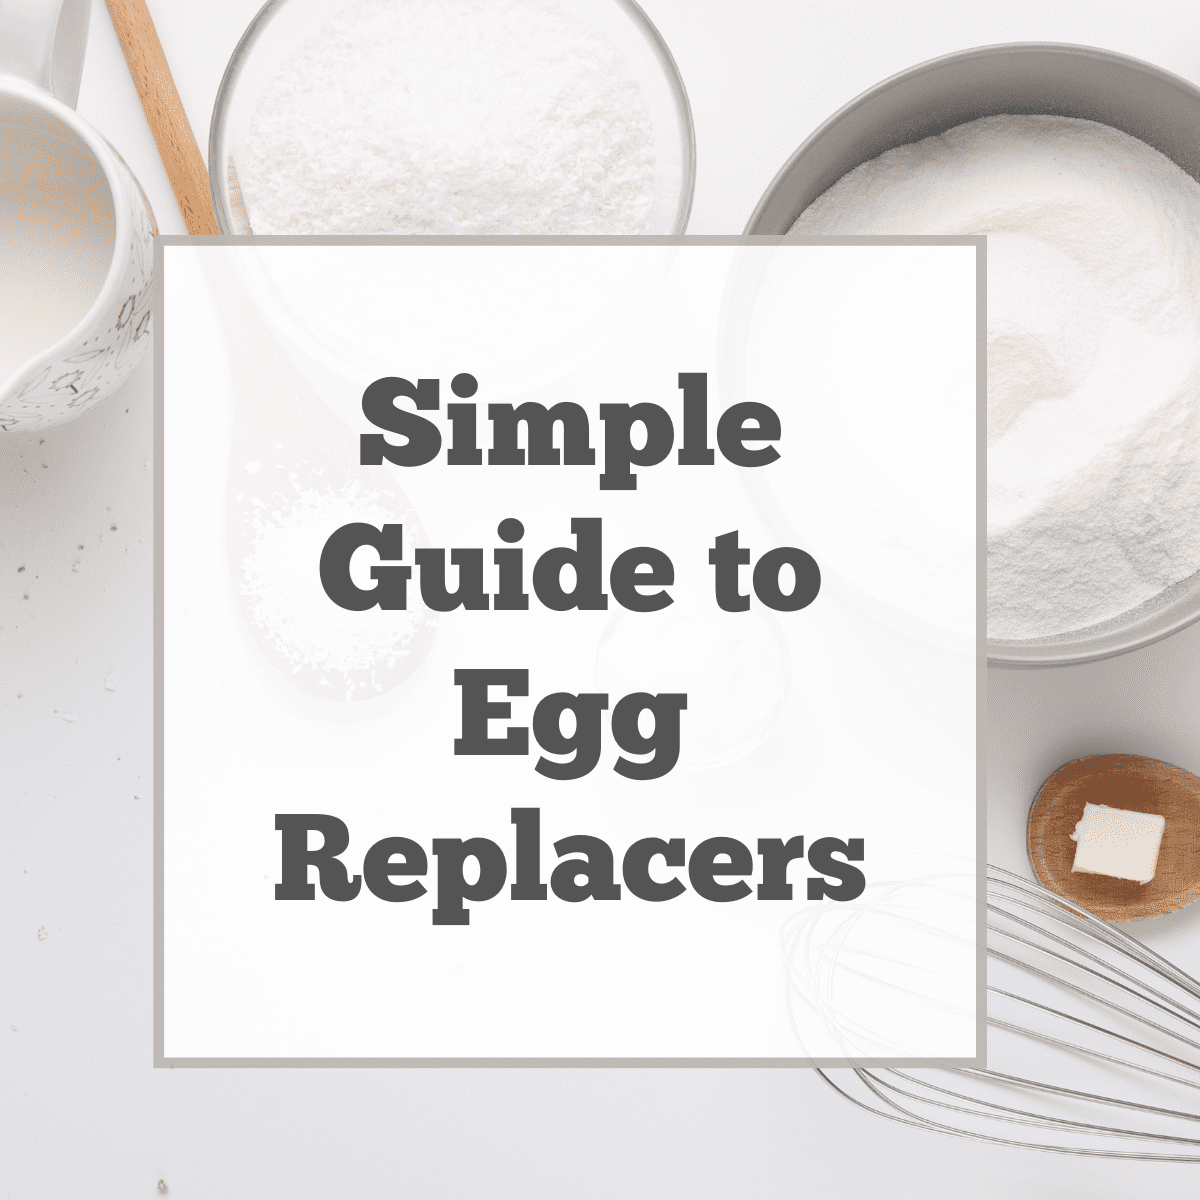 A Quick Guide to Egg Replacers